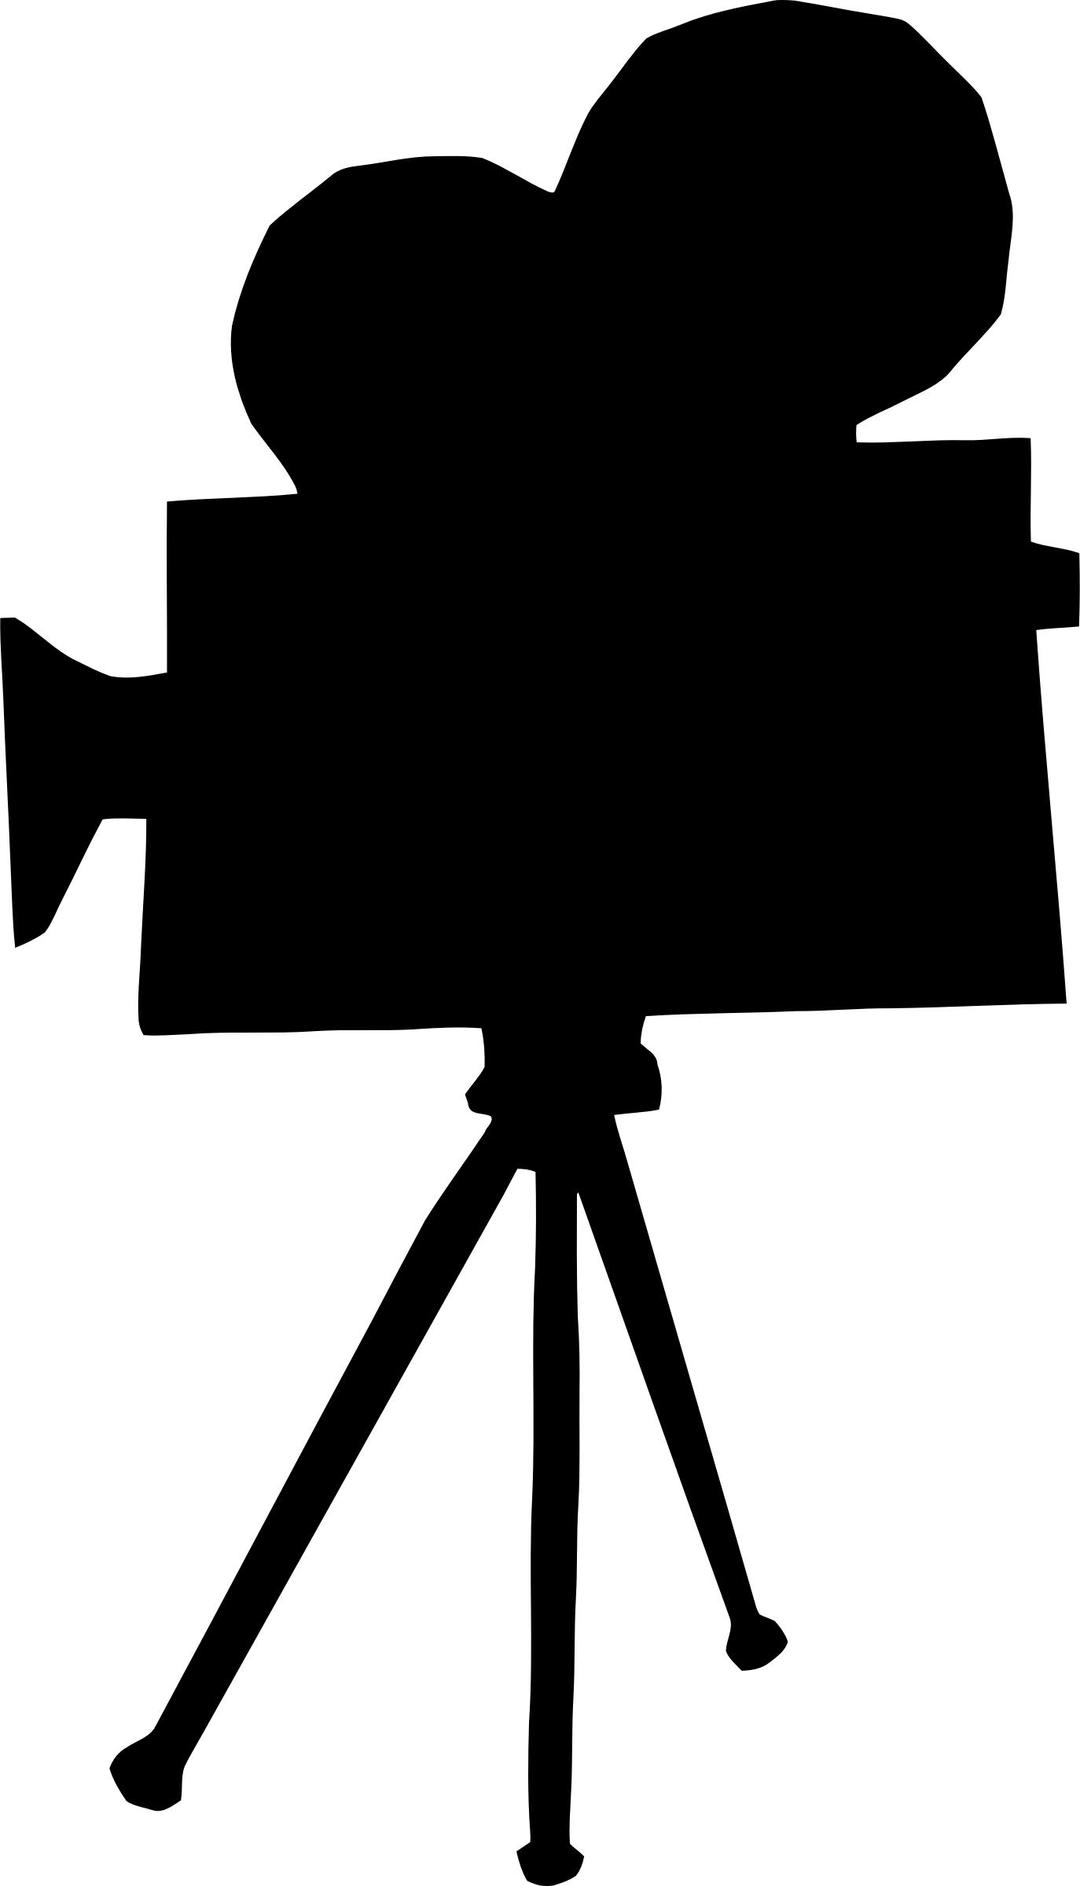 Movie projector vectorized png transparent